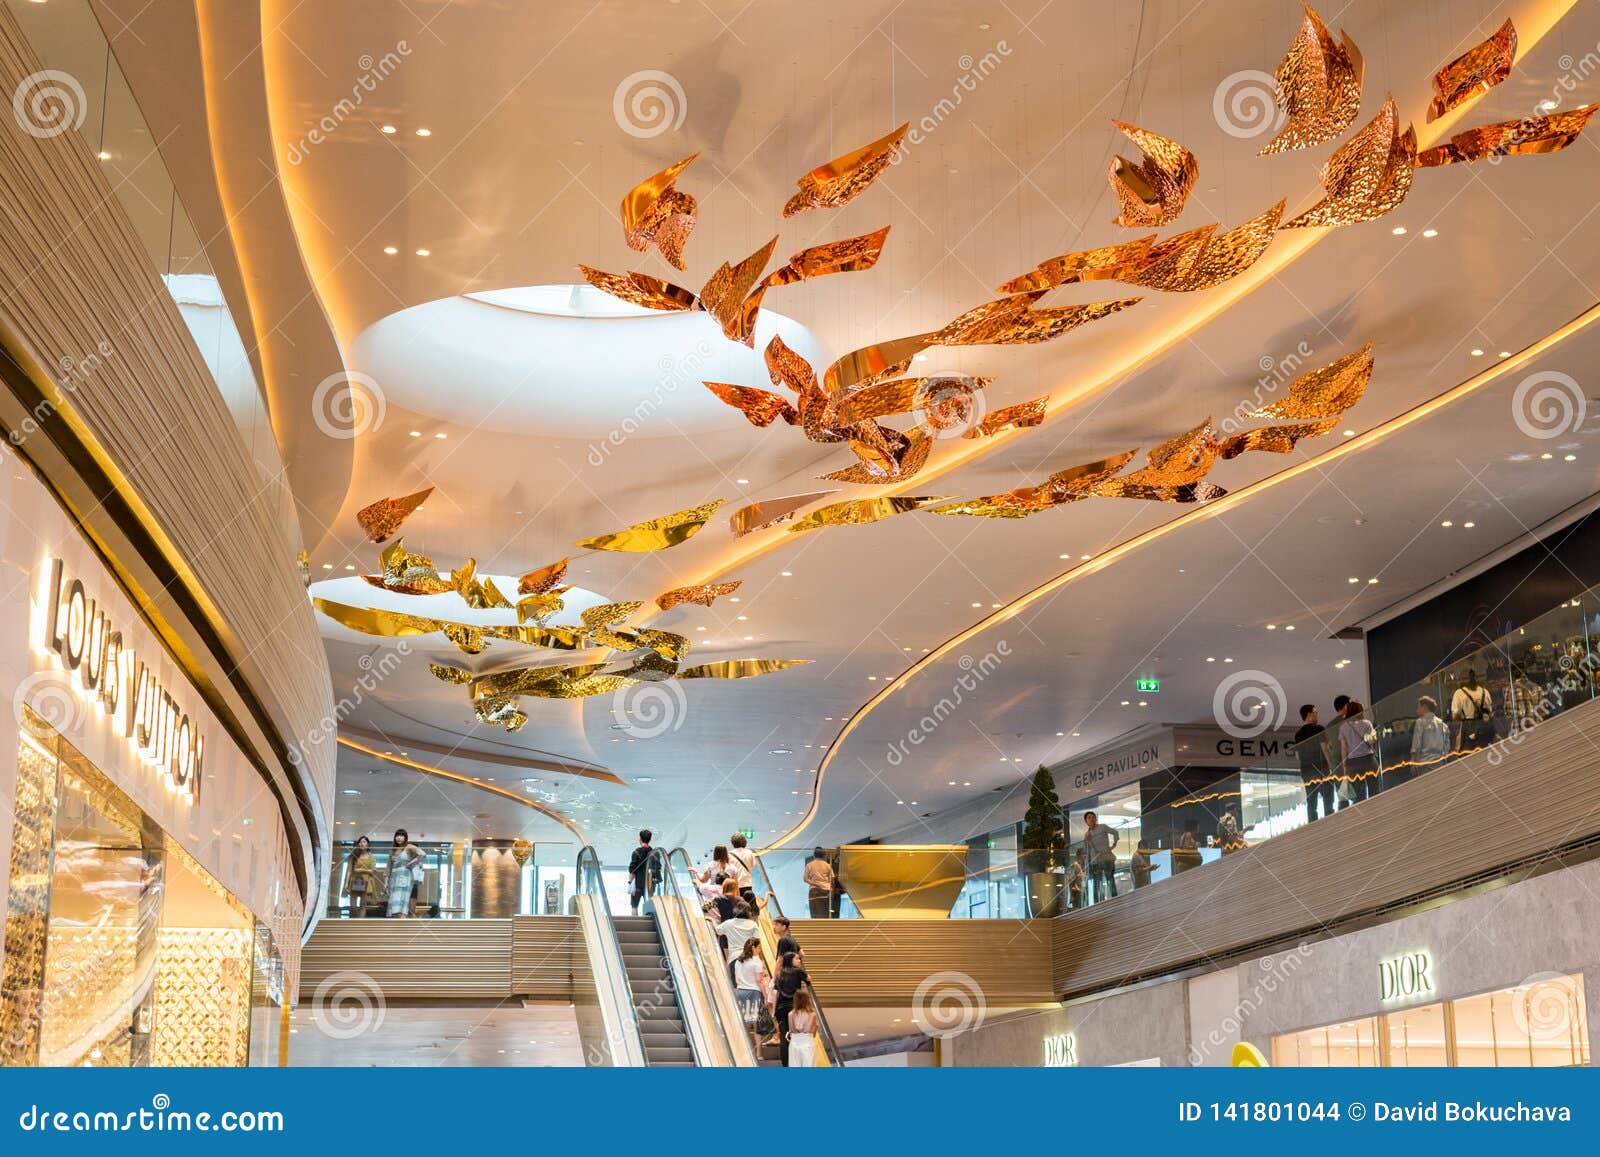 Iconsiam Icon Siam Shopping Mall In Bangkok Editorial Stock Image - Image of indoor, decoration ...